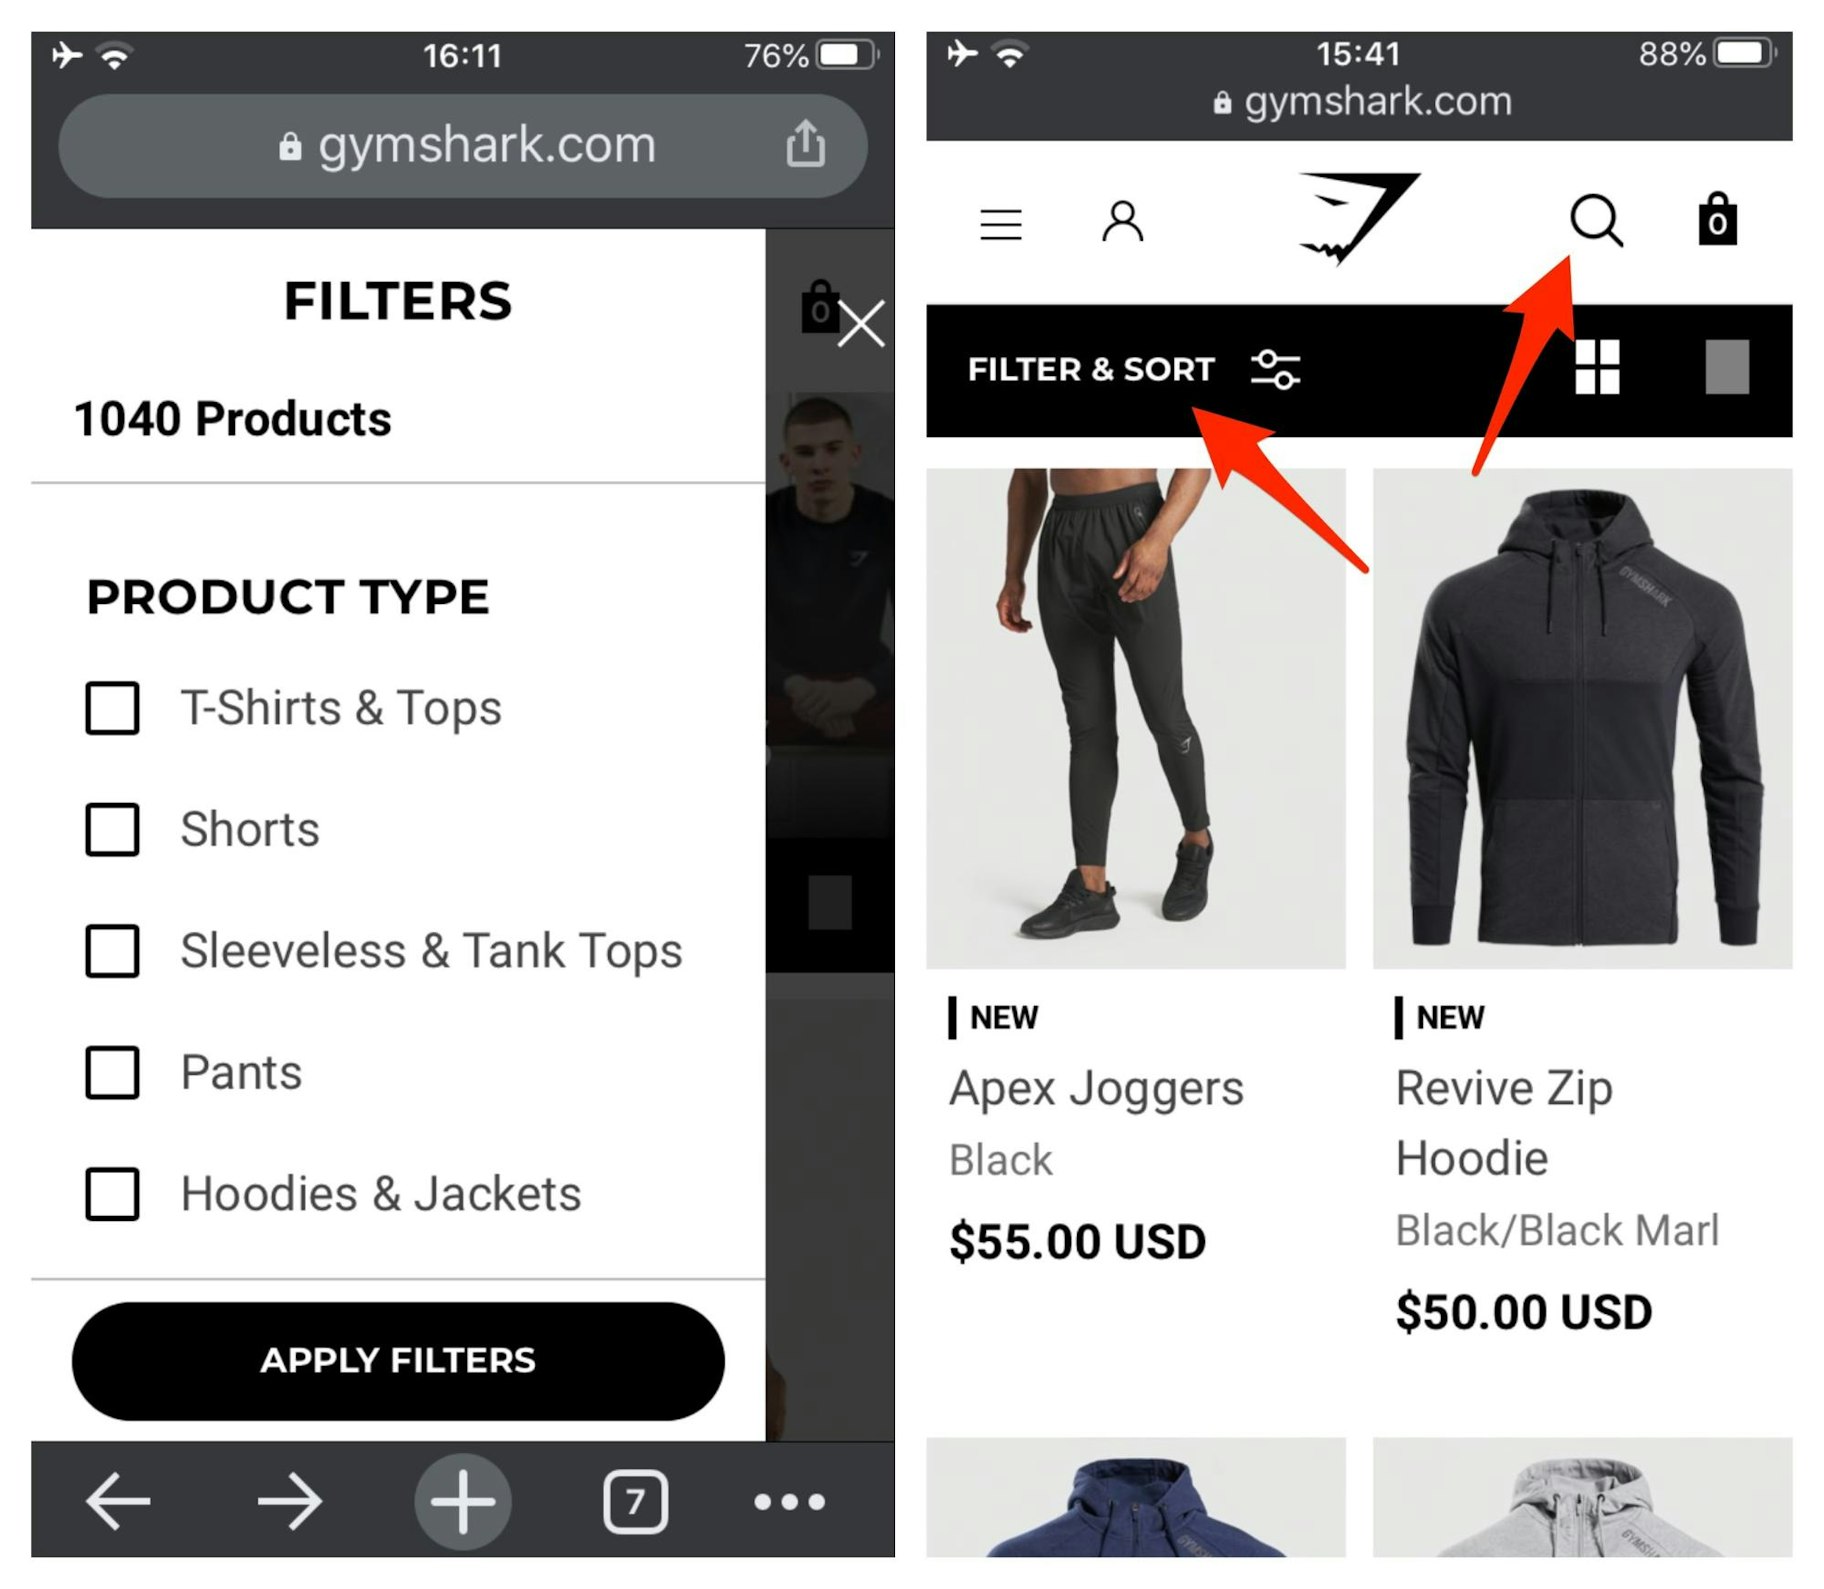 Gymshark Search and Filter Features